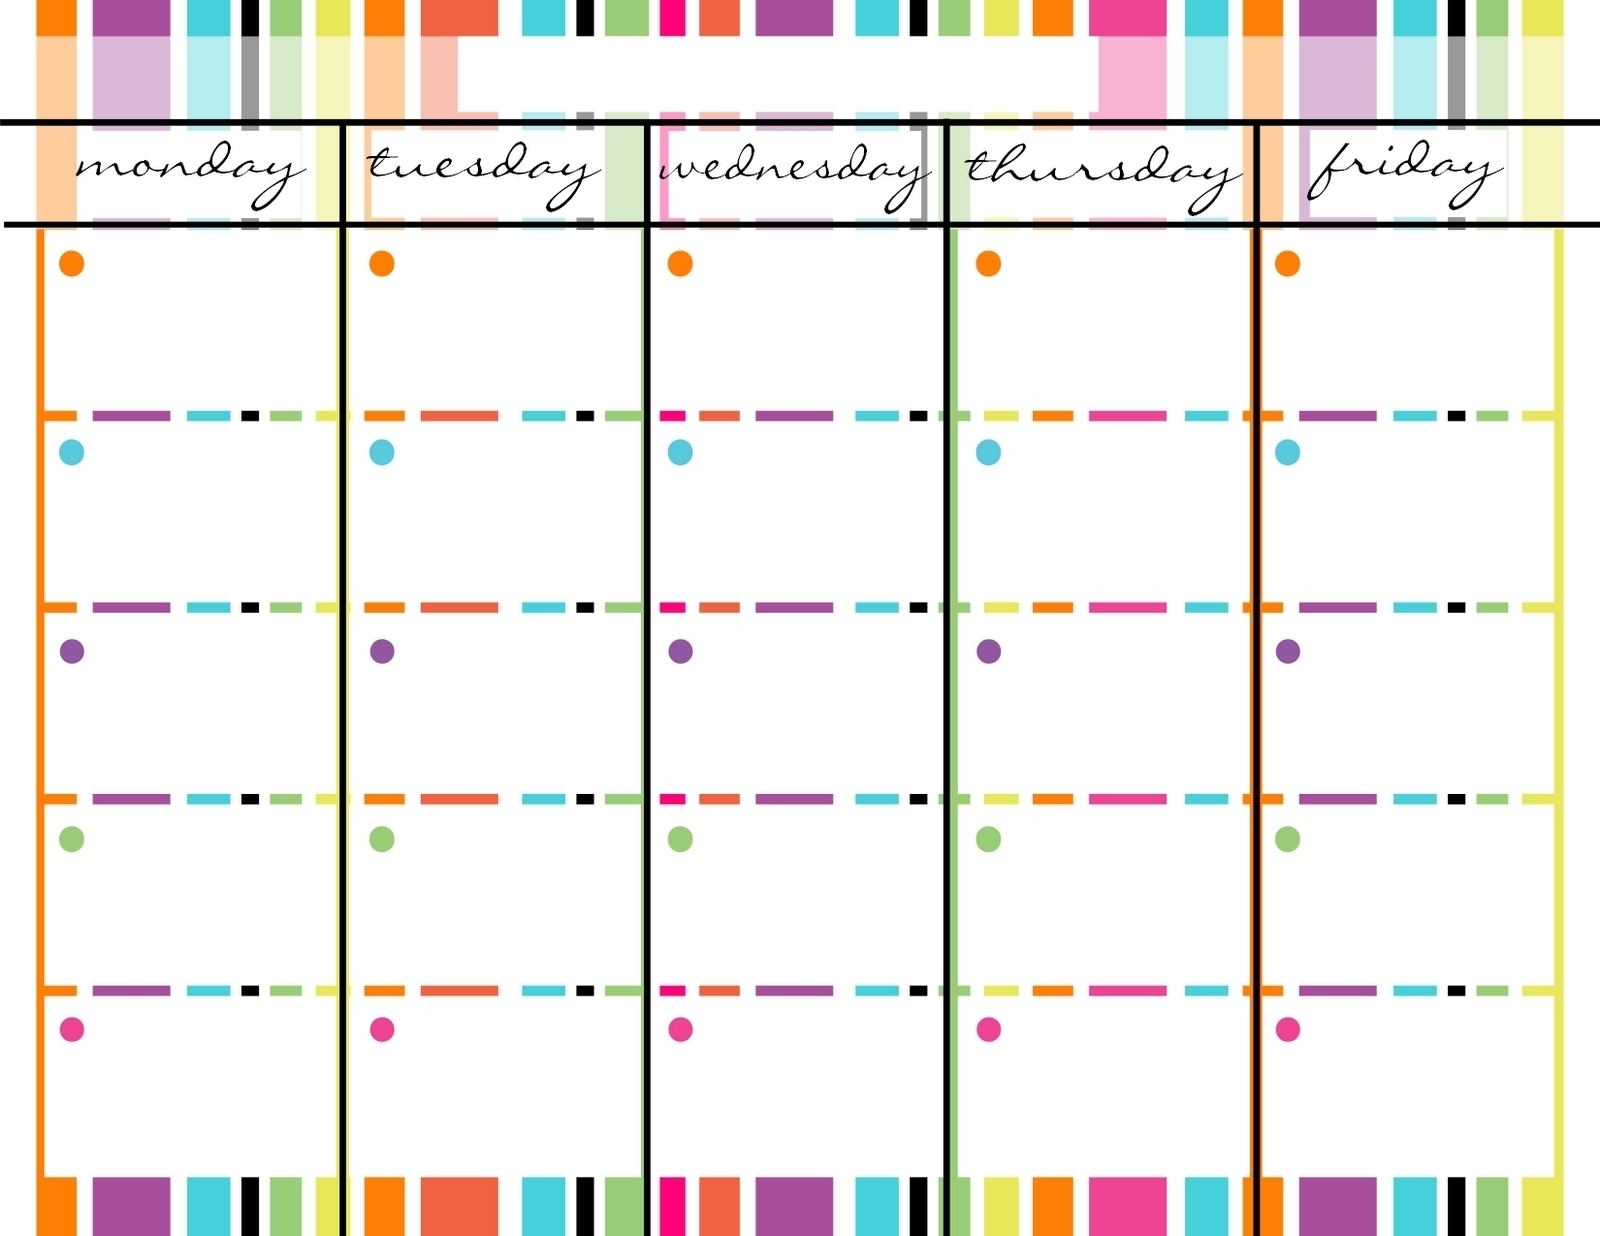 Schedule Template Weekly Blank Calendar Monday Through Iday Holidays intended for Blank Calendar Template Monday Friday